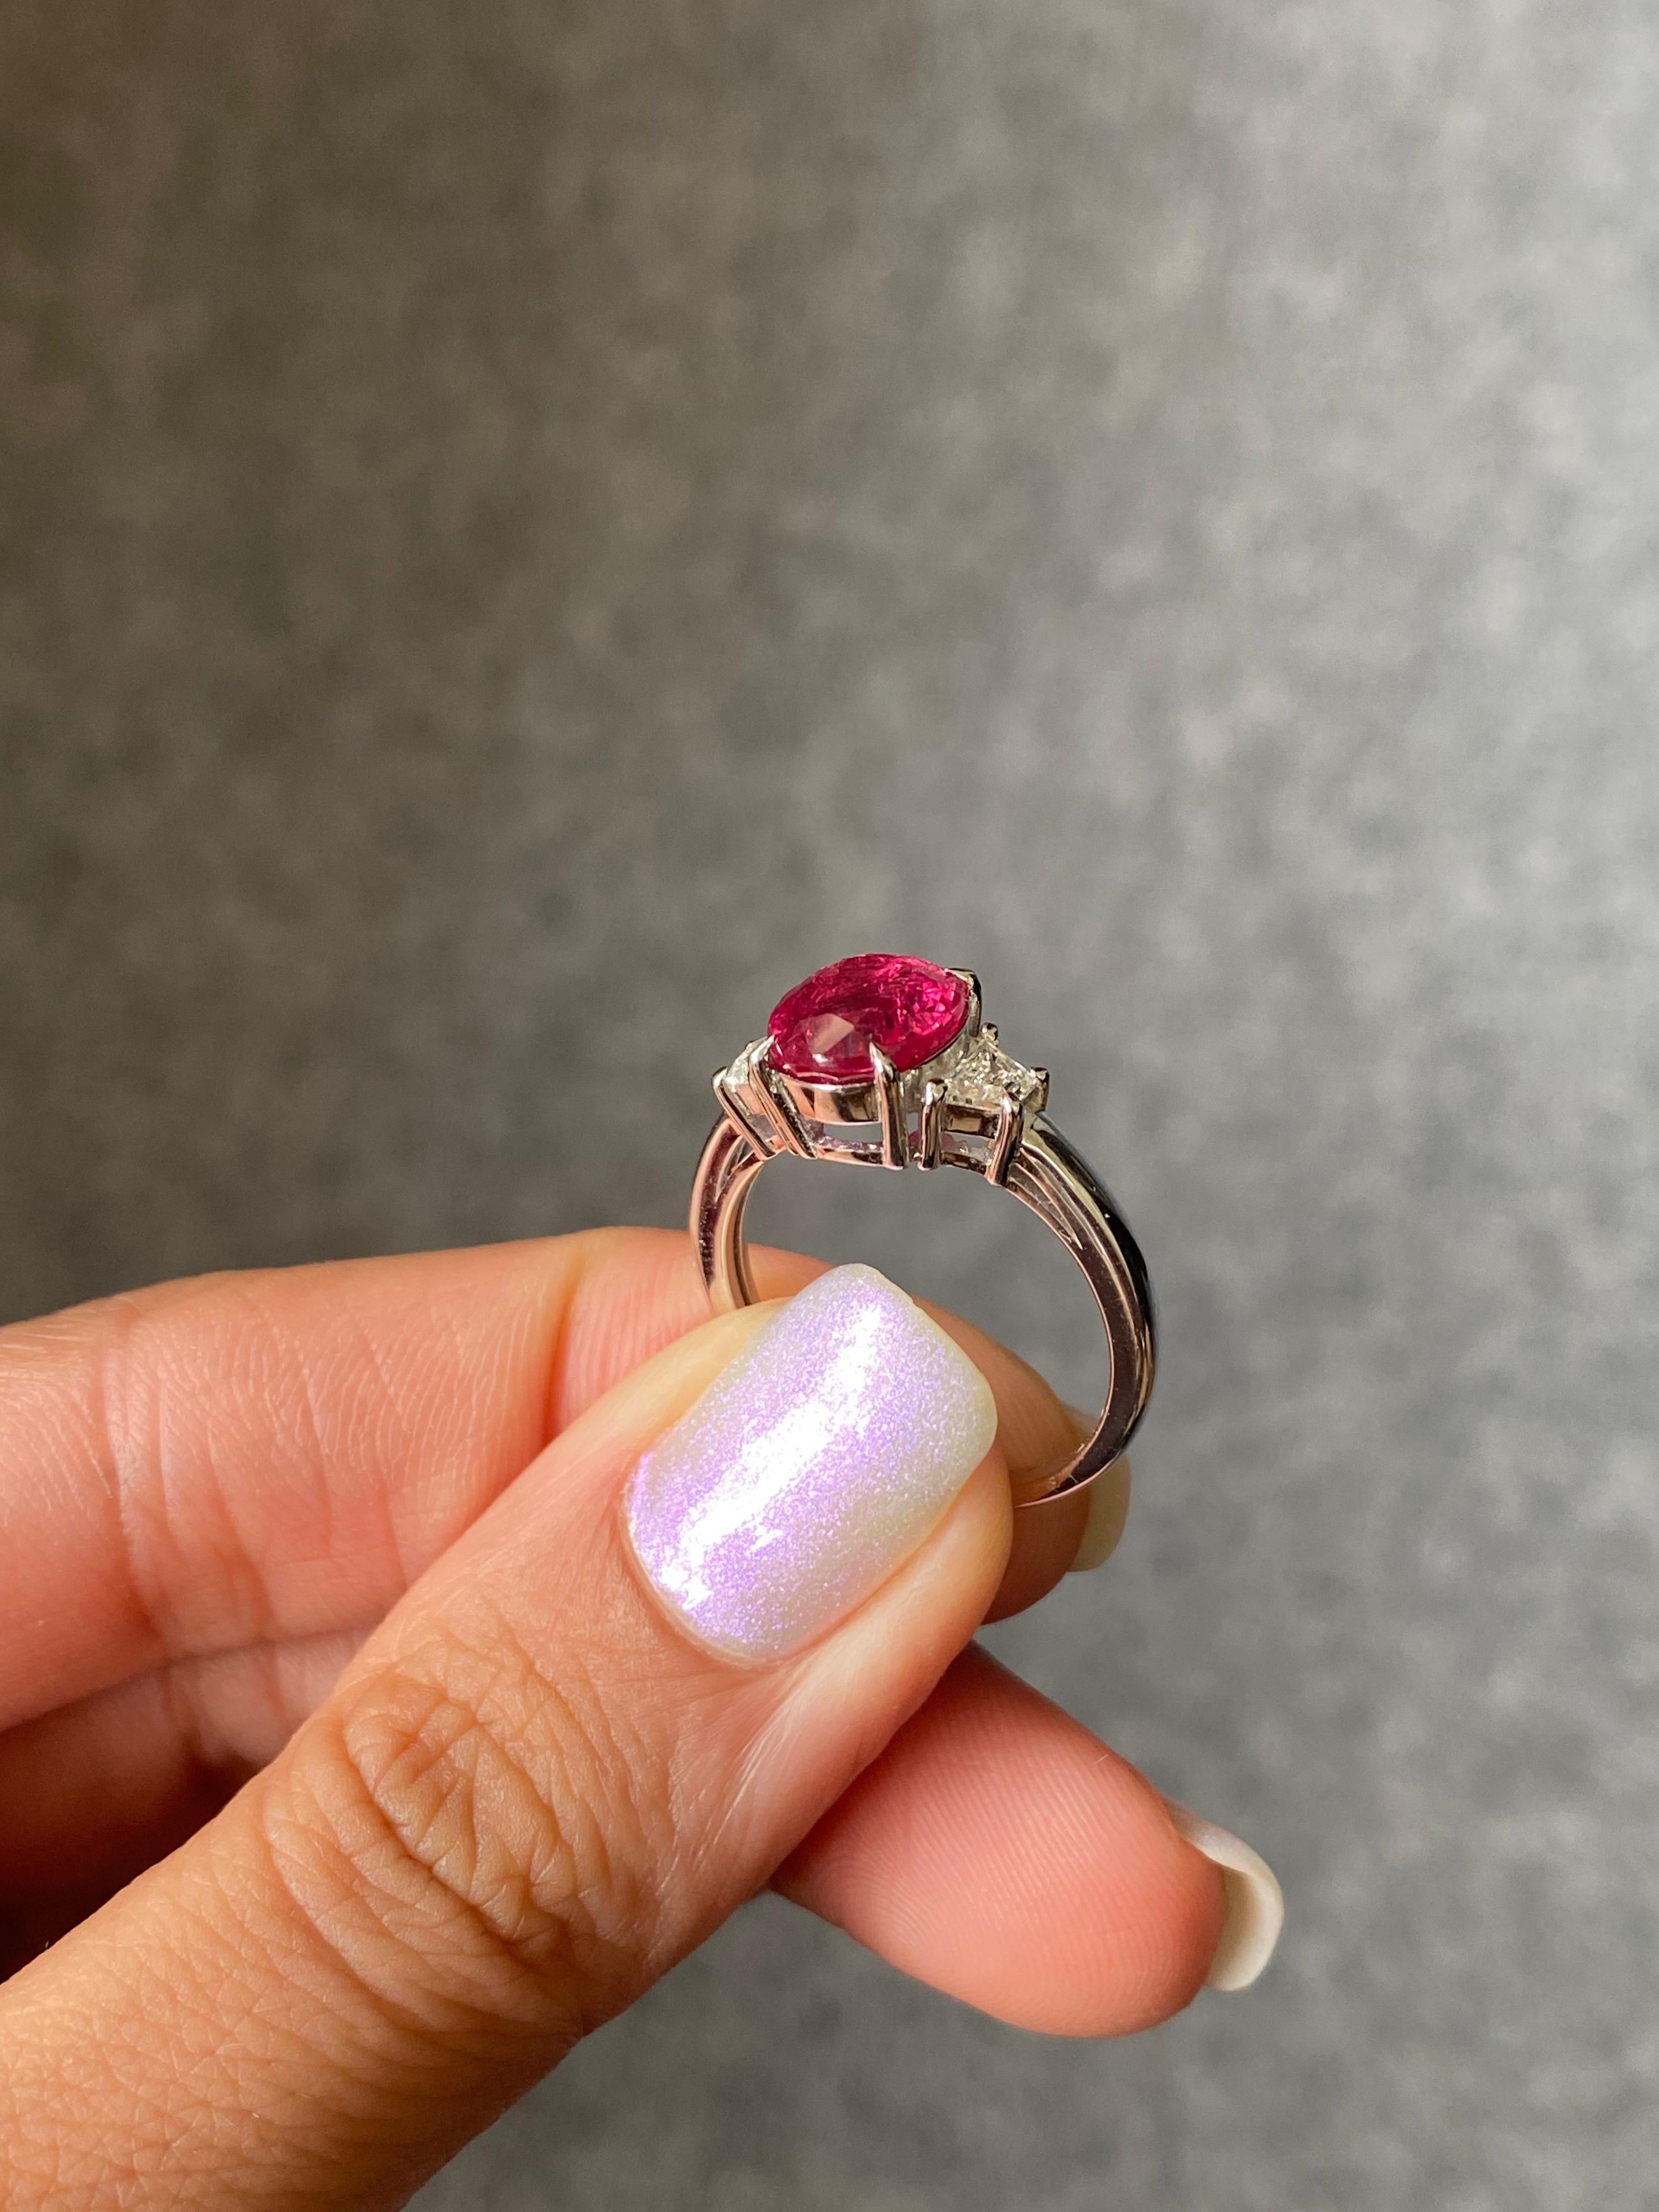 A beautiful 3.01 carat natural, no heat/treated Thai Ruby with 0.32 carat VS quality trapeze shaped White Diamonds, all set in 18K solid White Gold. The Ruby is transparent, with a stunning pinkish-red color and great luster. The ring is currently